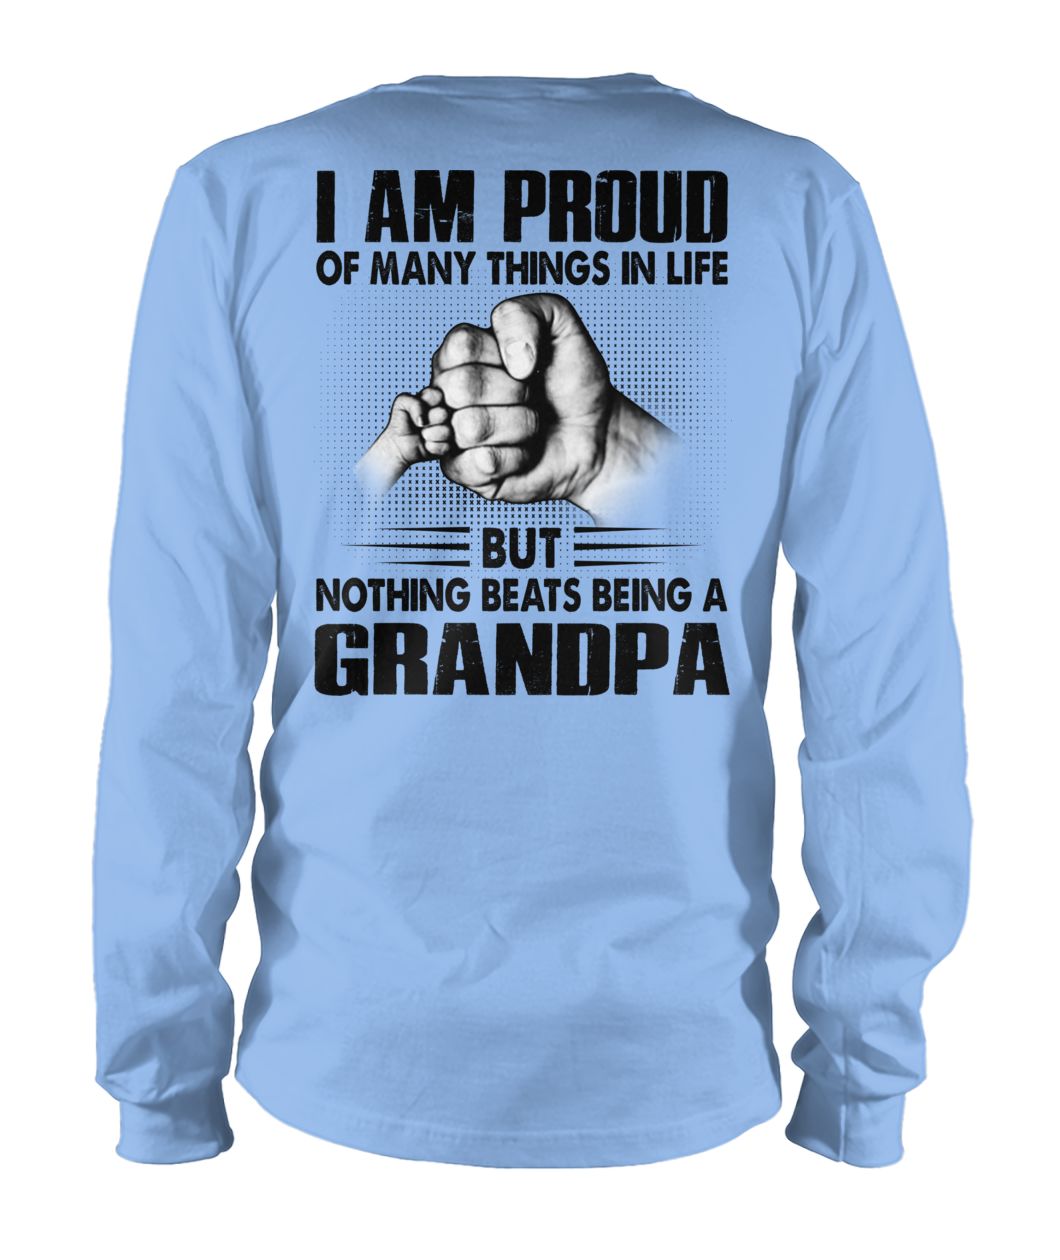 I am proud of many things in life but nothing beats being a grandpa unisex long sleeve